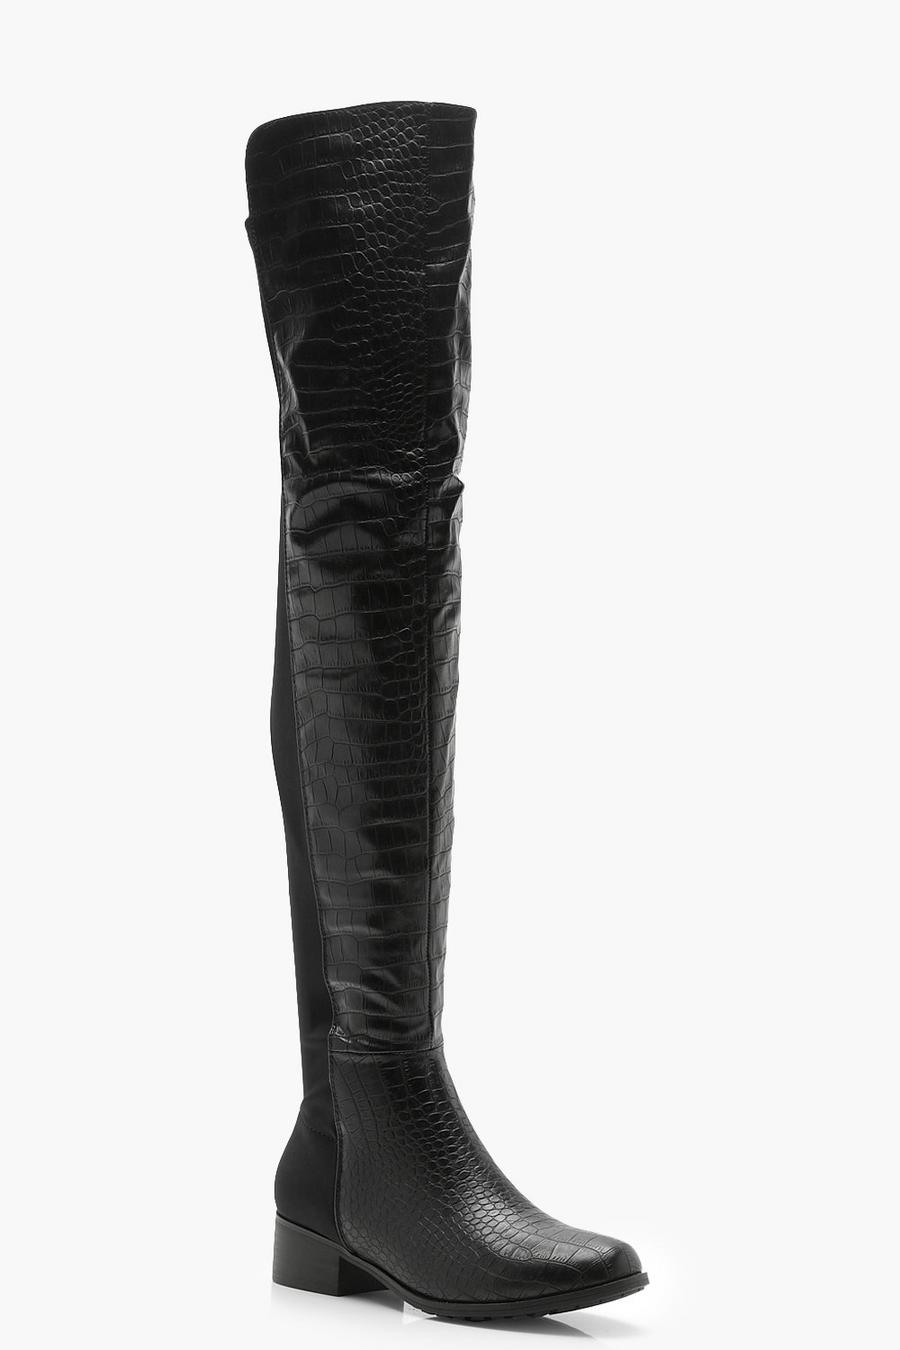 Black Croc Over The Knee High Boots image number 1